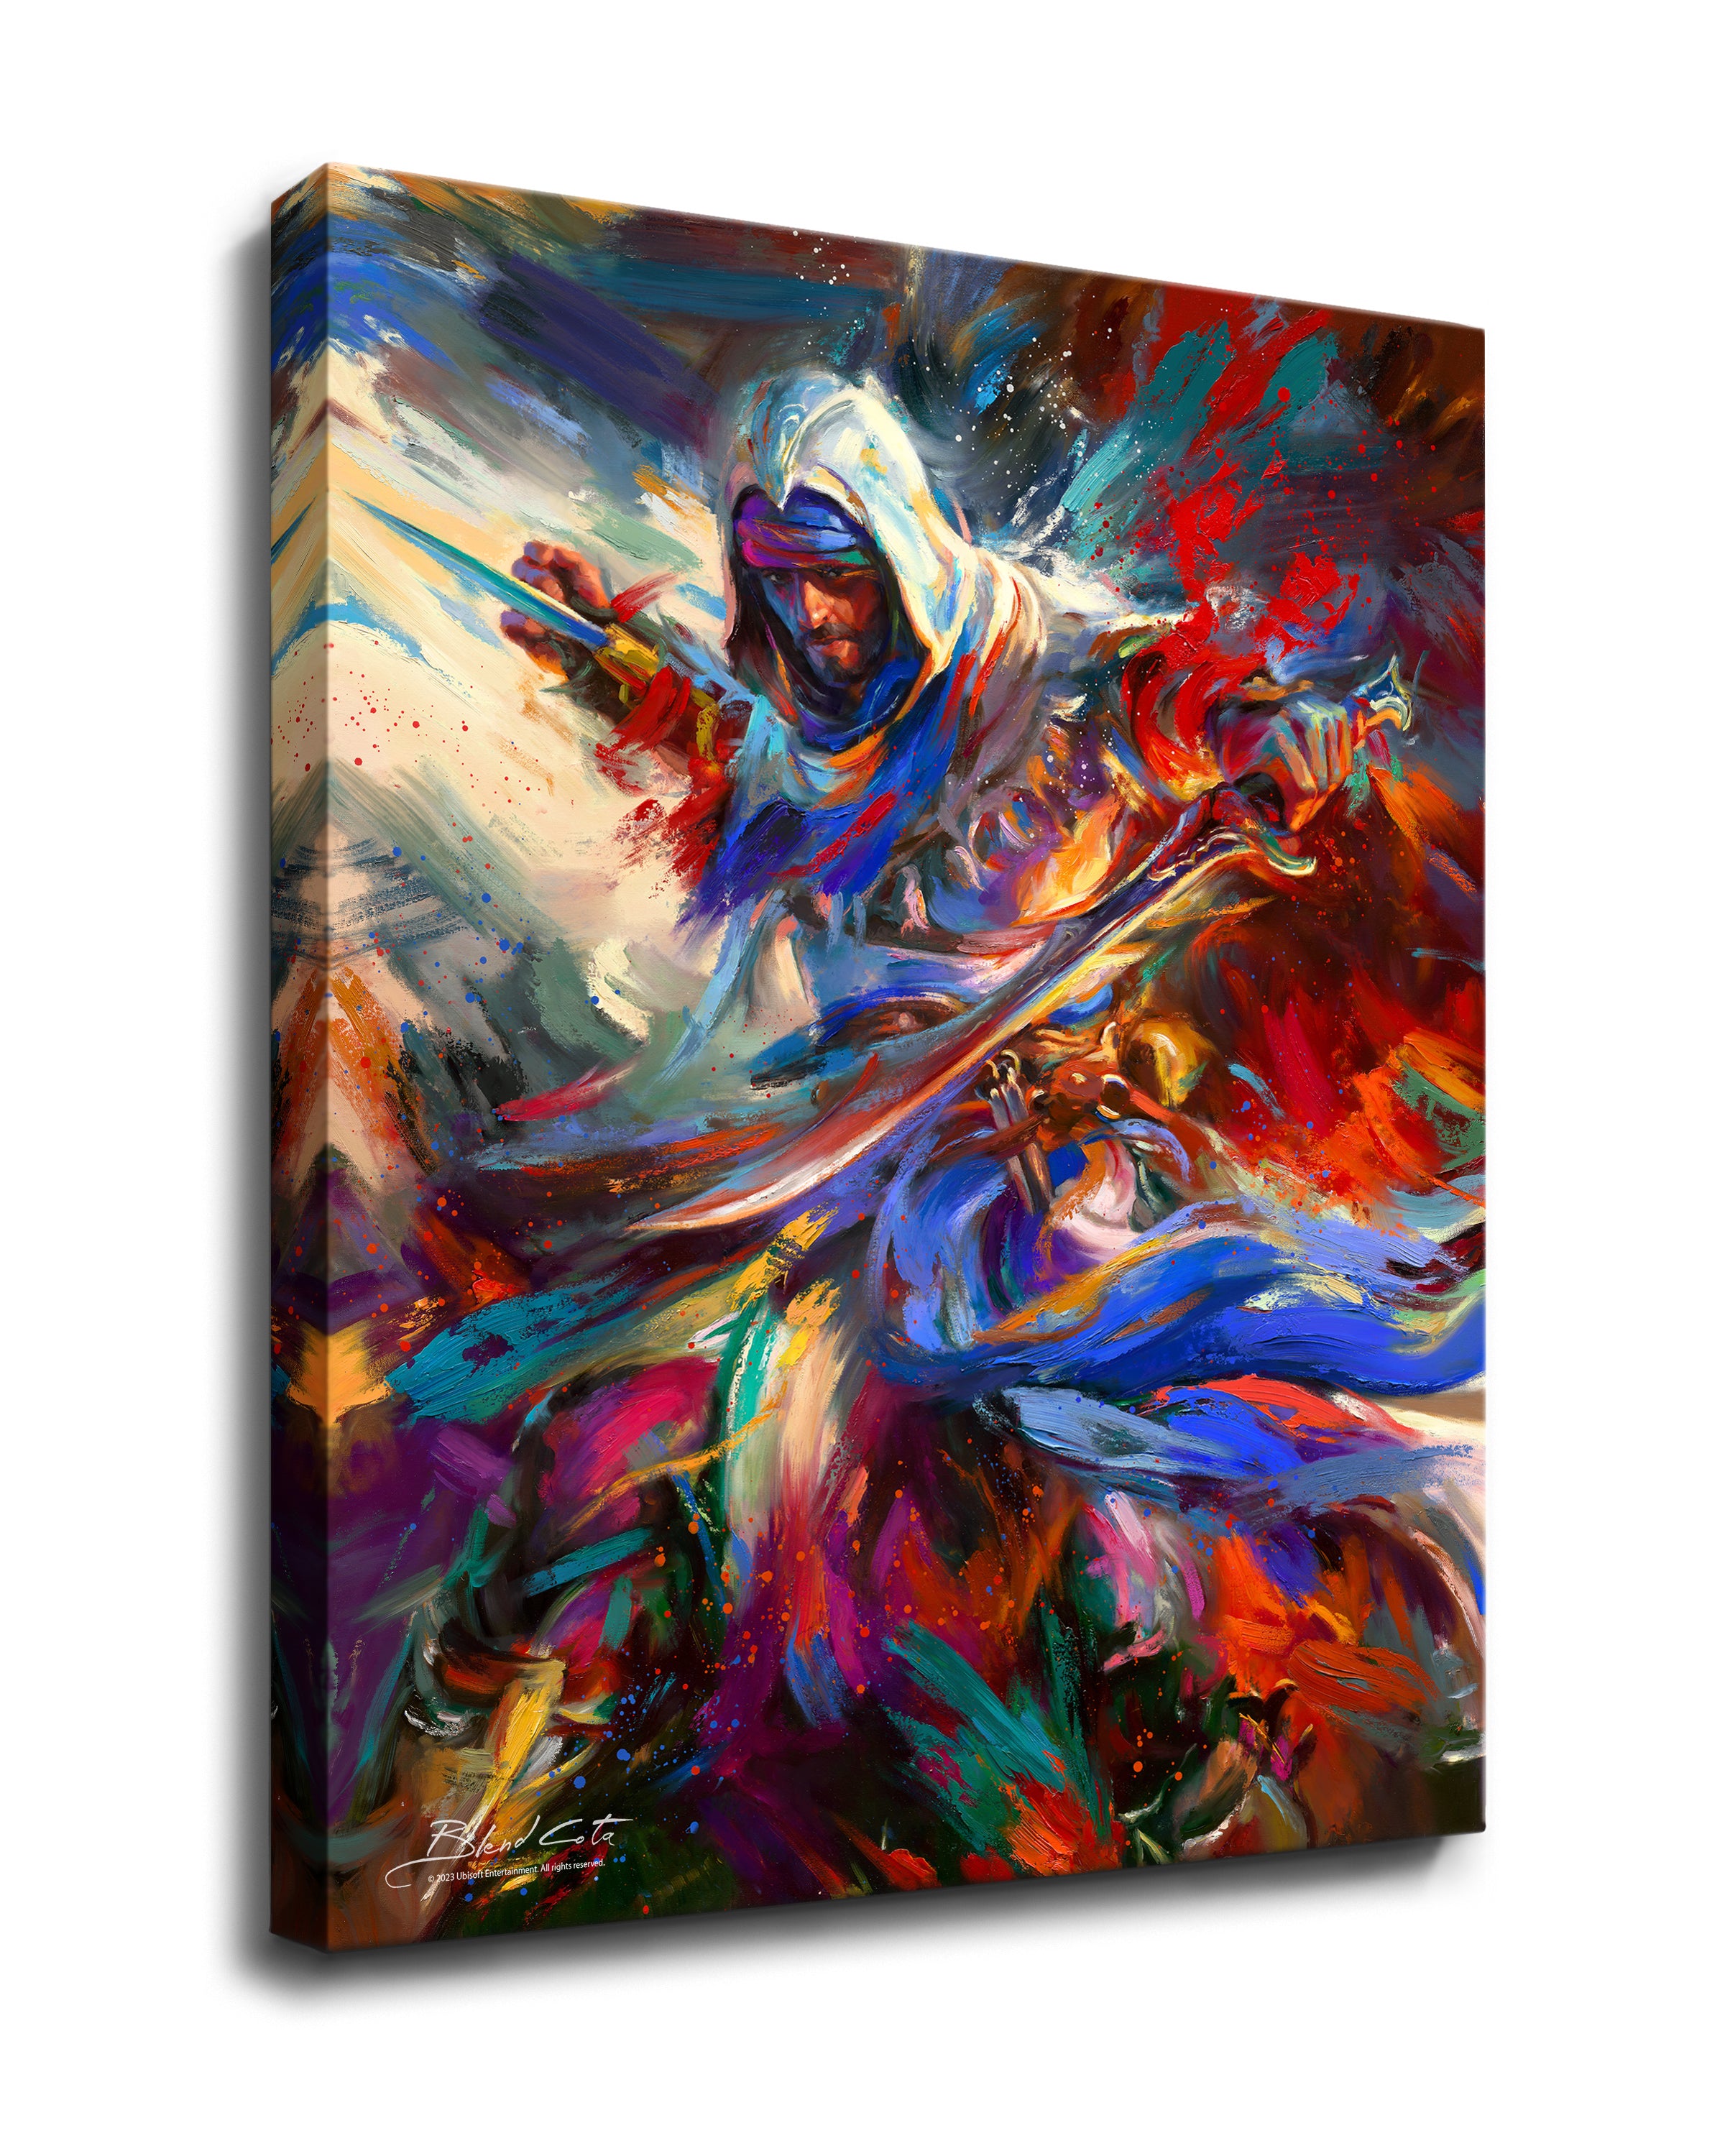 
                  
                    Gallery wrapped art print on canvas of Assassin's Creed Basim of Mirage bursting forth with energy and painted with colorful brushstrokes in an expressionistic style.
                  
                